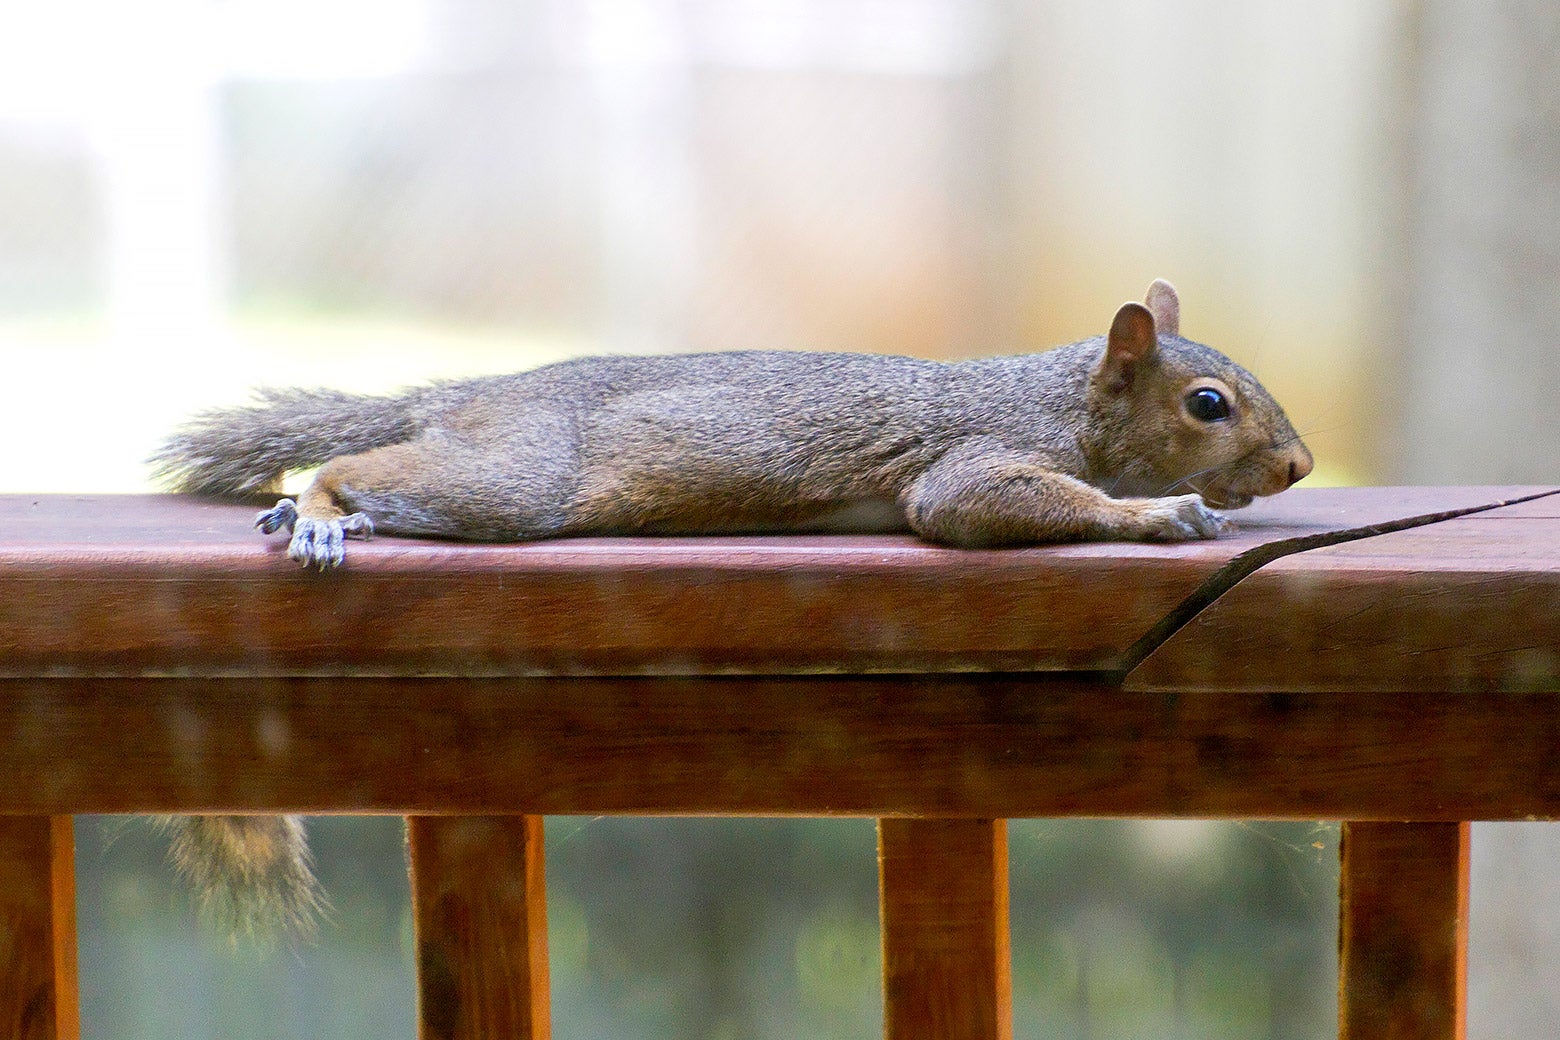 Squirrel in a splooting pose (stretching) on a bench